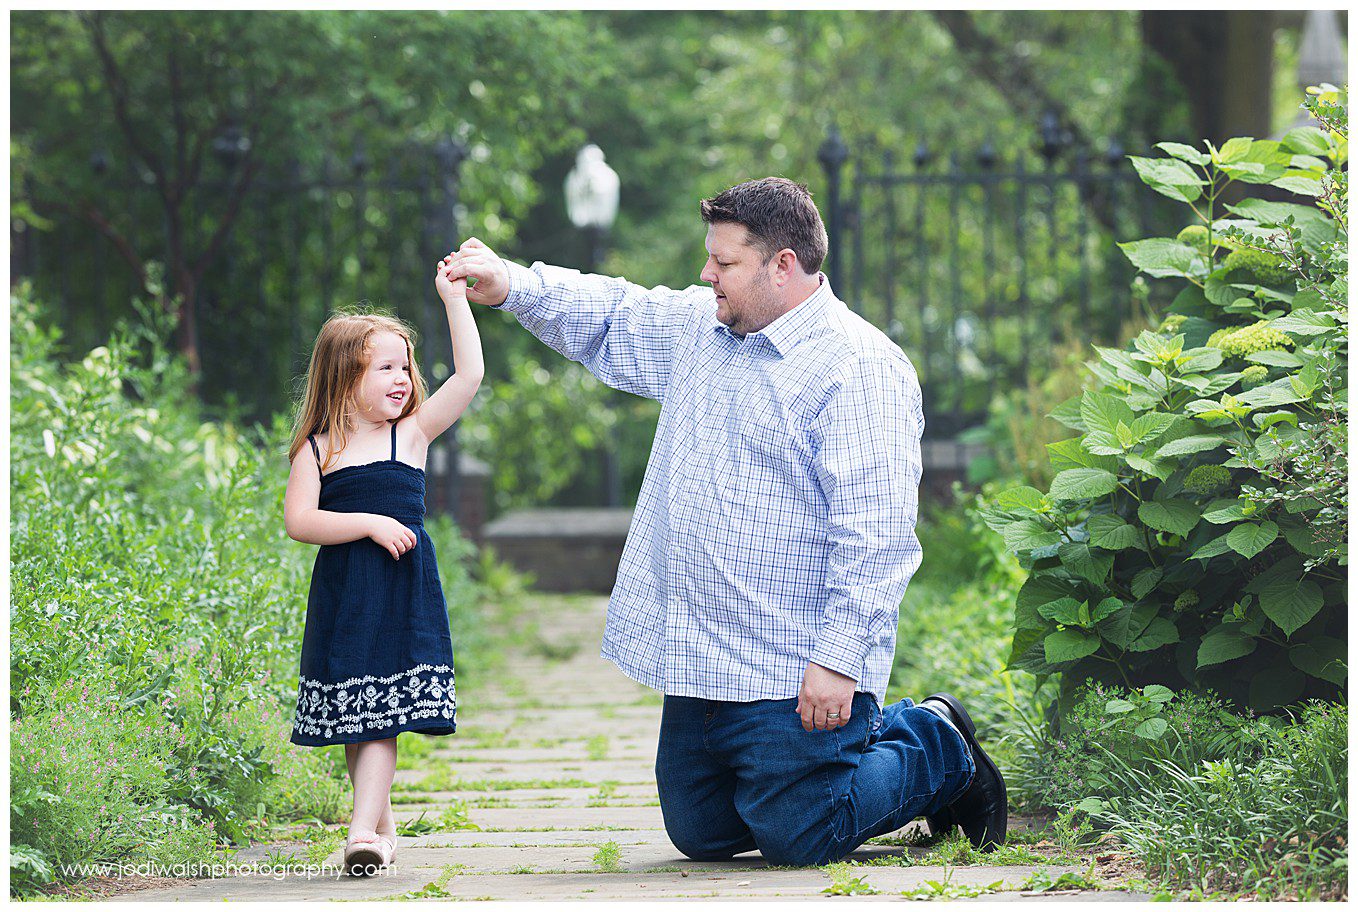 Image of a father and young daughter. Daddy is kneeling and looking at his daughter while holding her hand as she smiles at him and goes to twirl. They're on a pathway in Mellon Park.